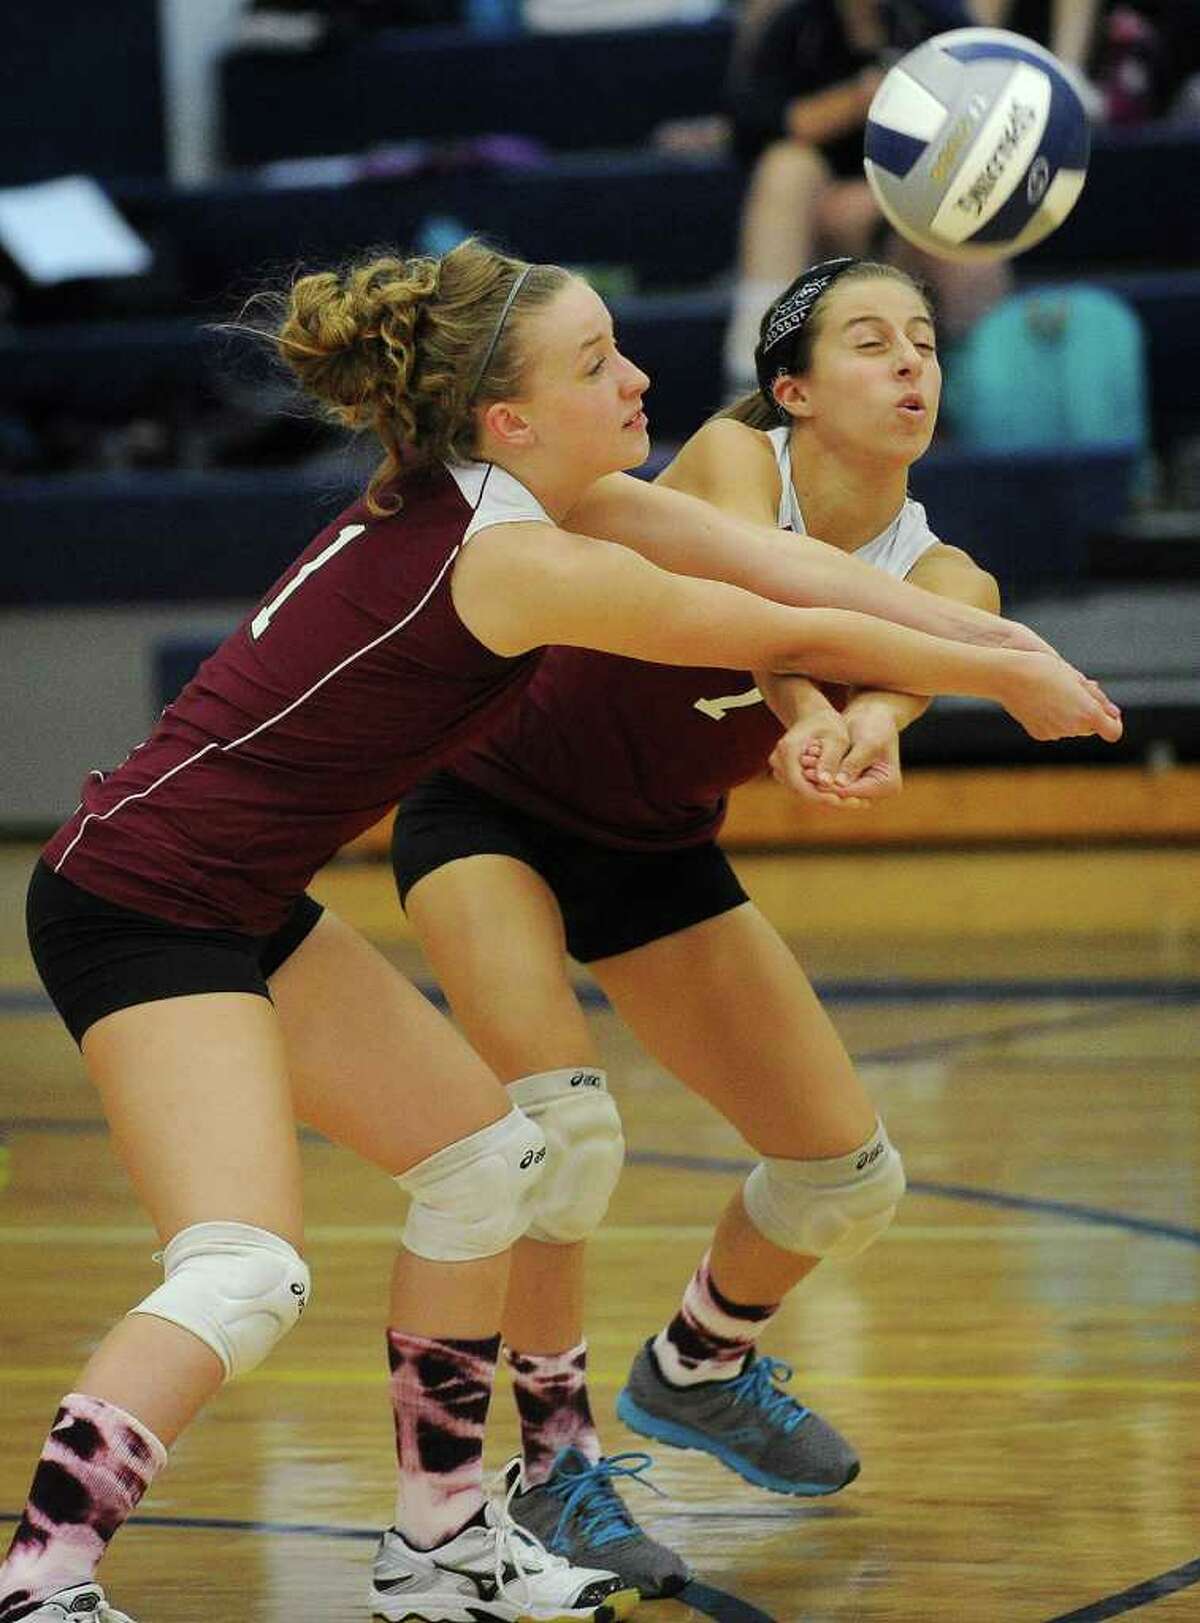 Bethel's Nicole Cibu, left, and Brooke Ferraro converge on the ball during their match at Weston High School on Monday, September 19, 2011.